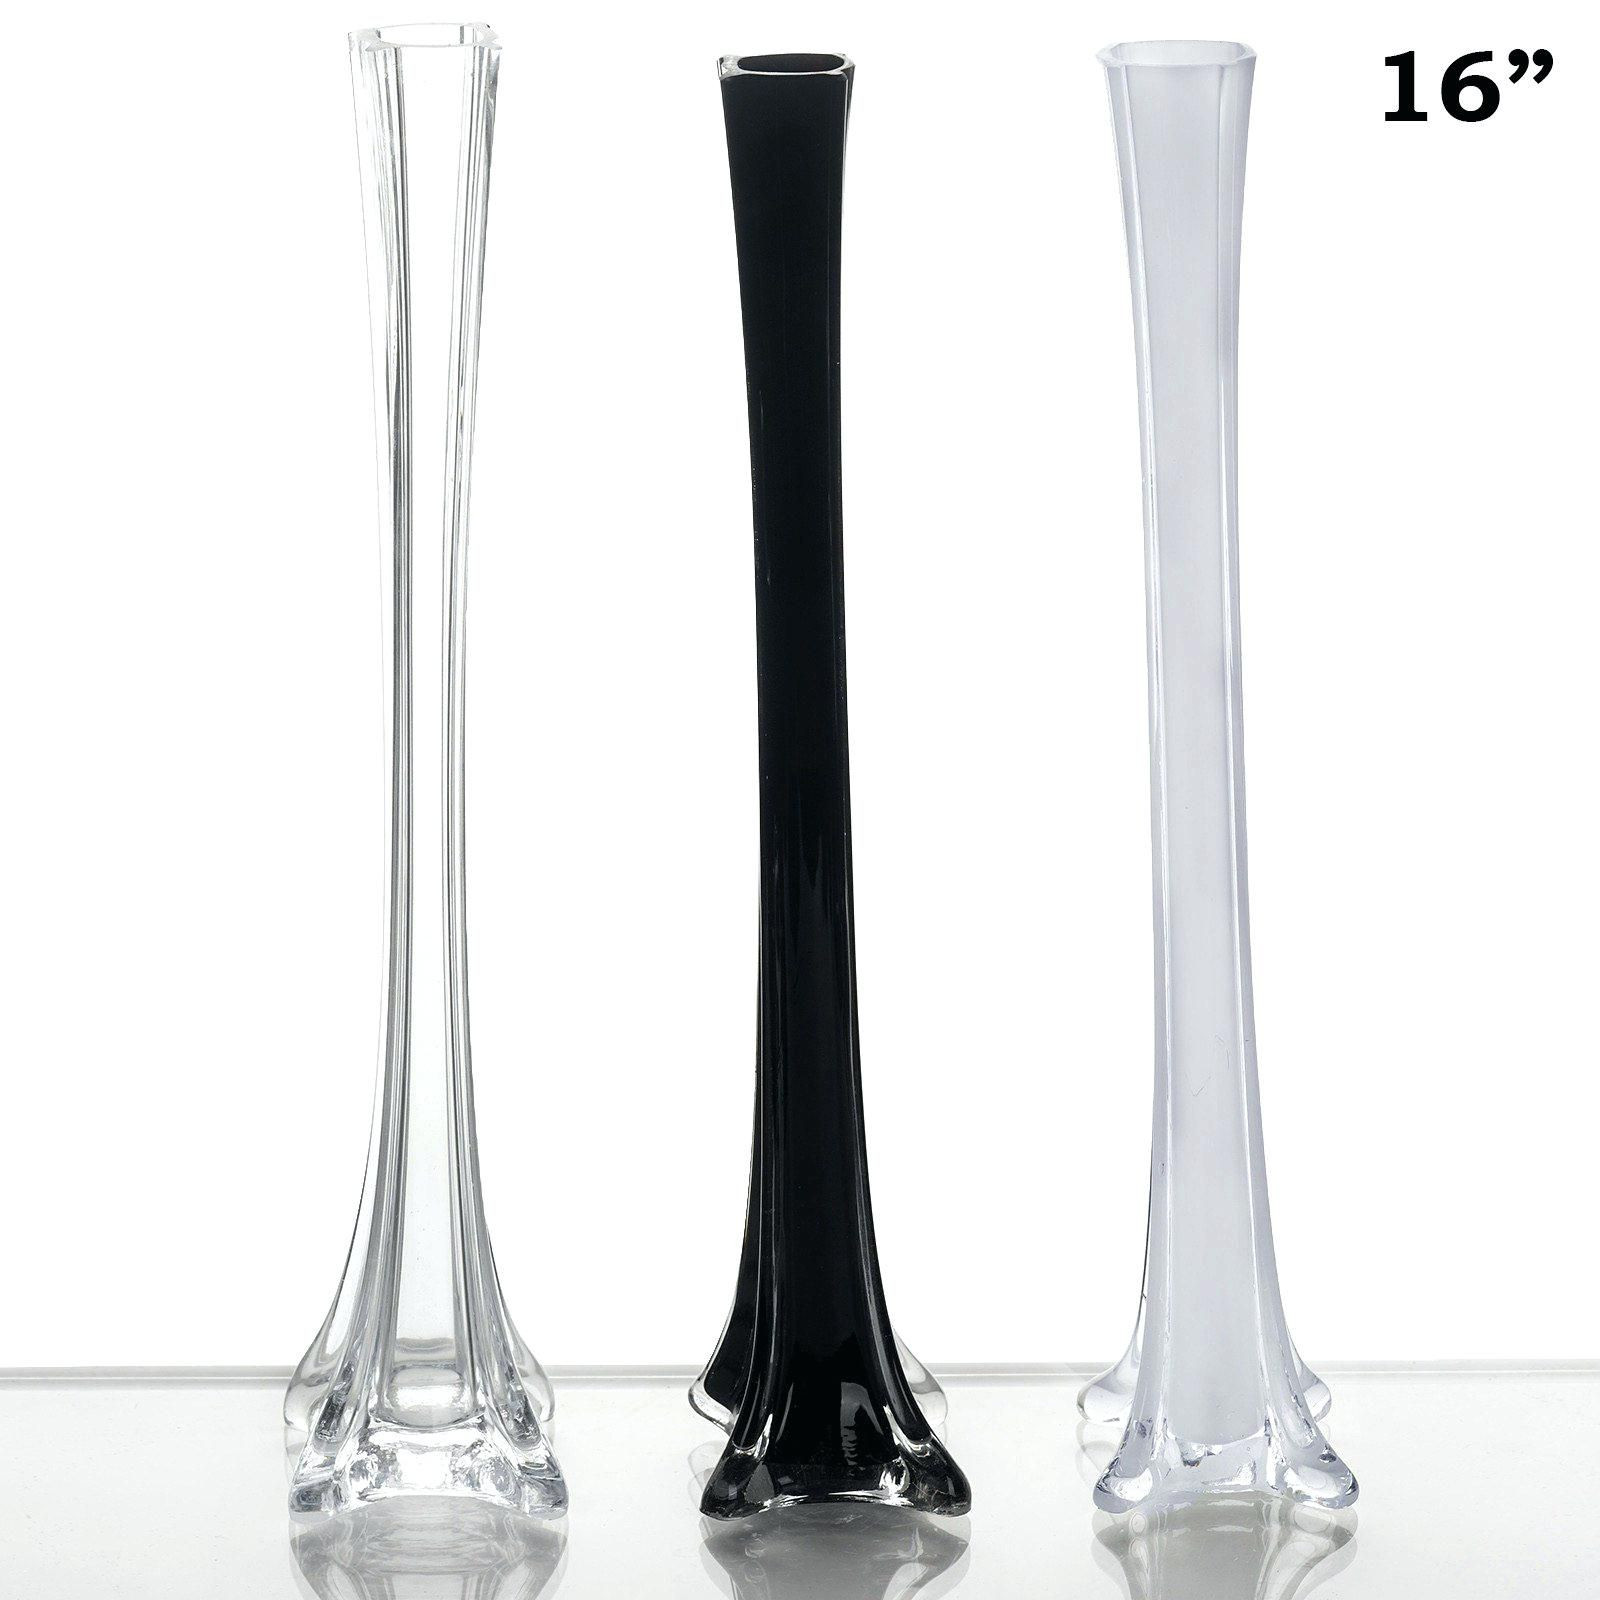 24 glass vases wholesale of 40 glass vases bulk the weekly world with gallery plastic eiffel tower vases wholesale drawings art gallery